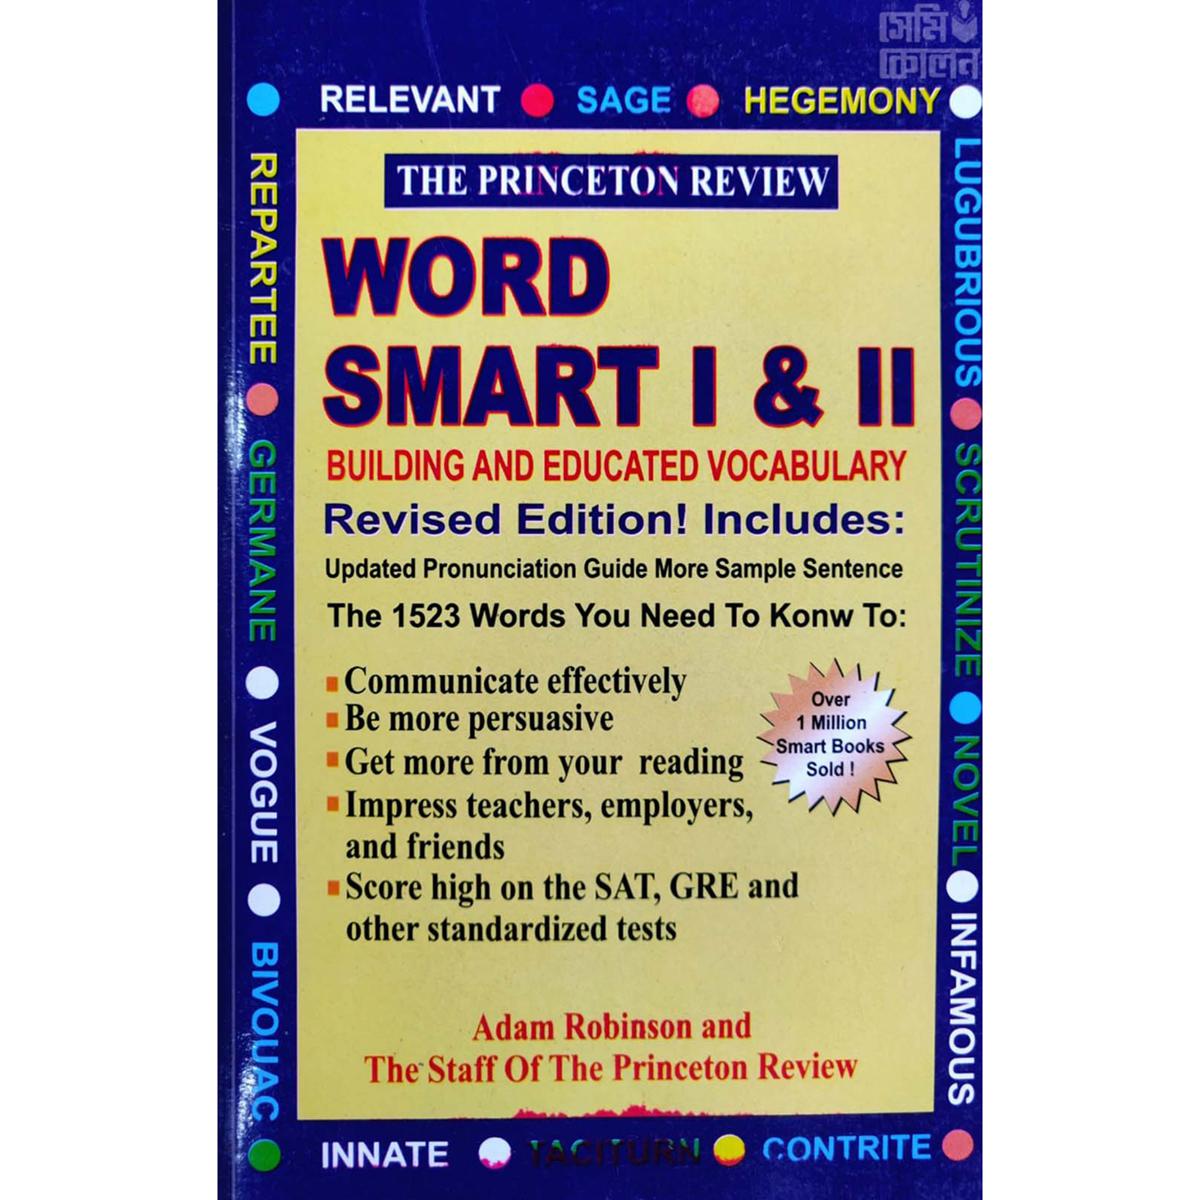 Word Smart 1 and 2 by Adam Robinson